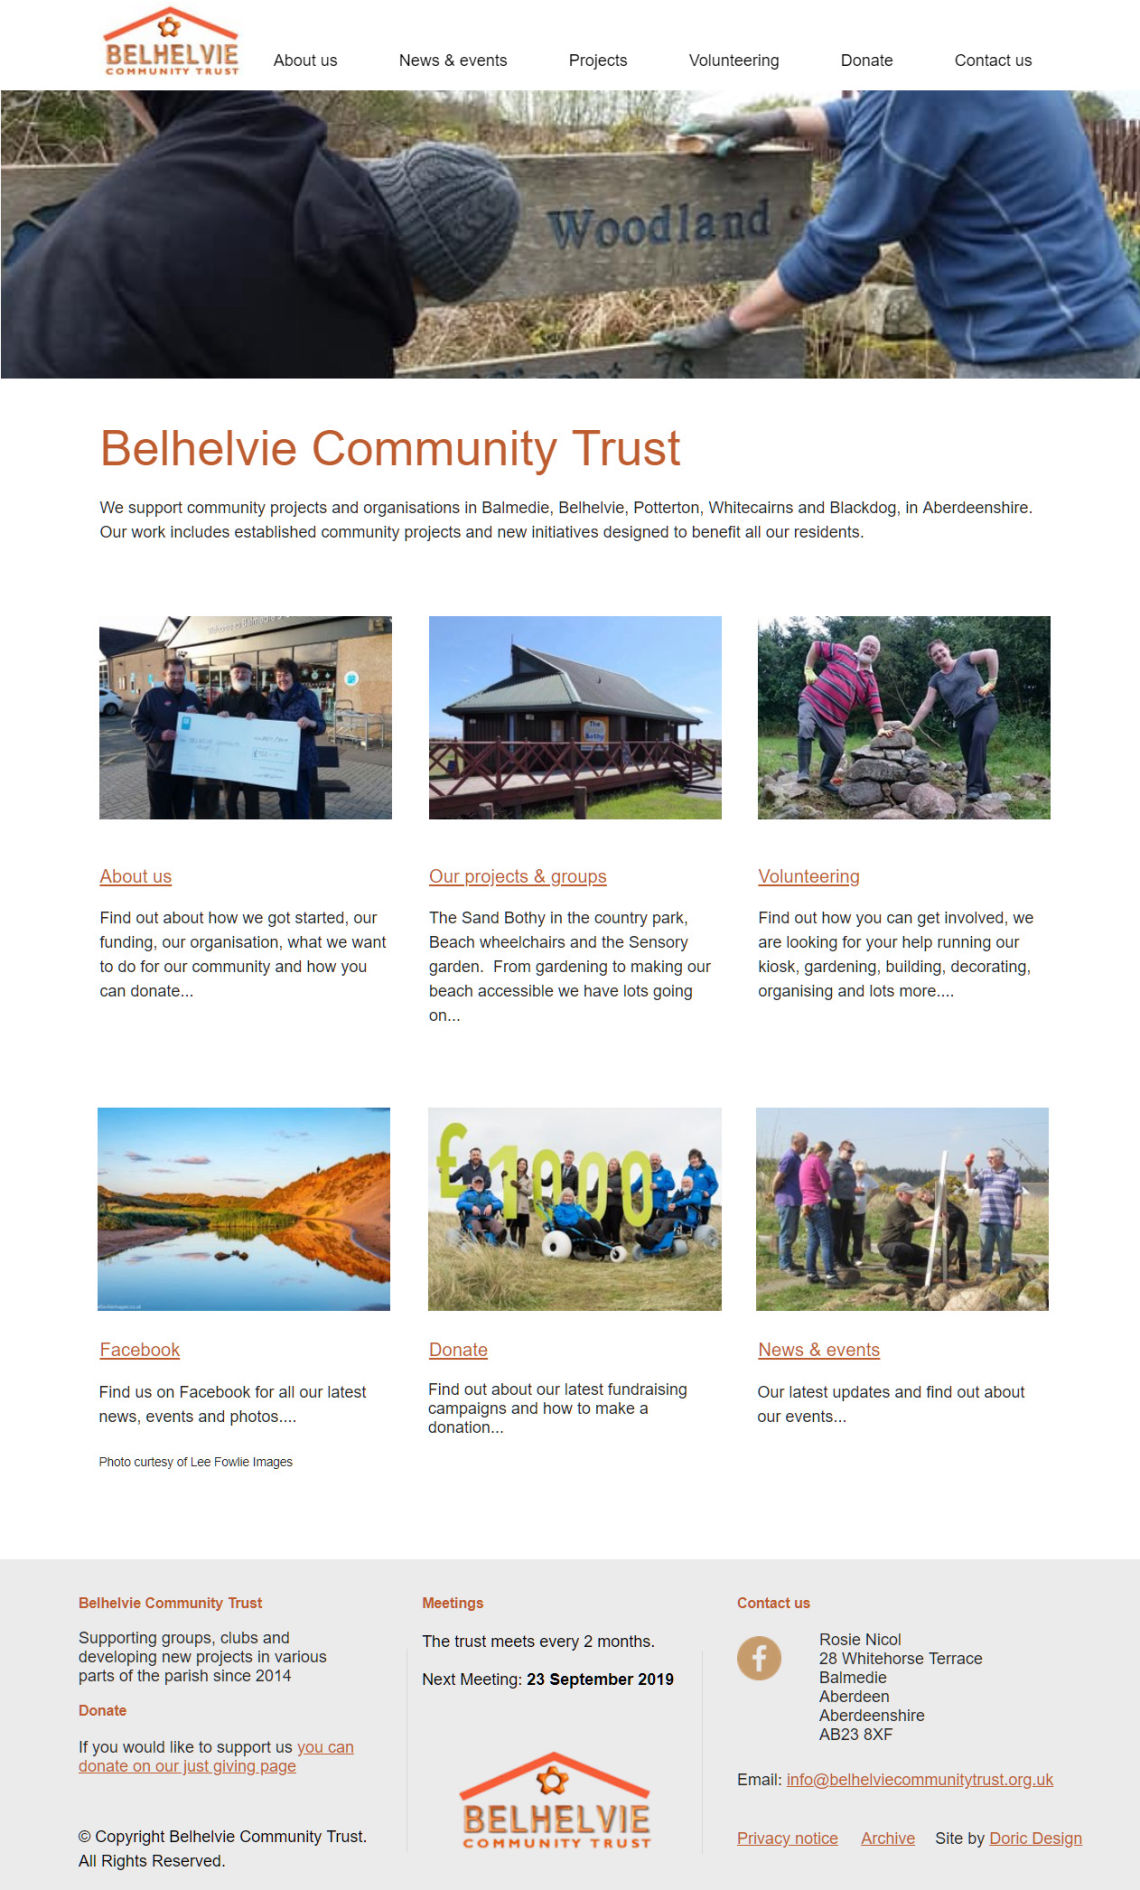 Homepage of the Belhelvie Community Trust designed by Doric Design - shows members of the Trust volunteering on projects